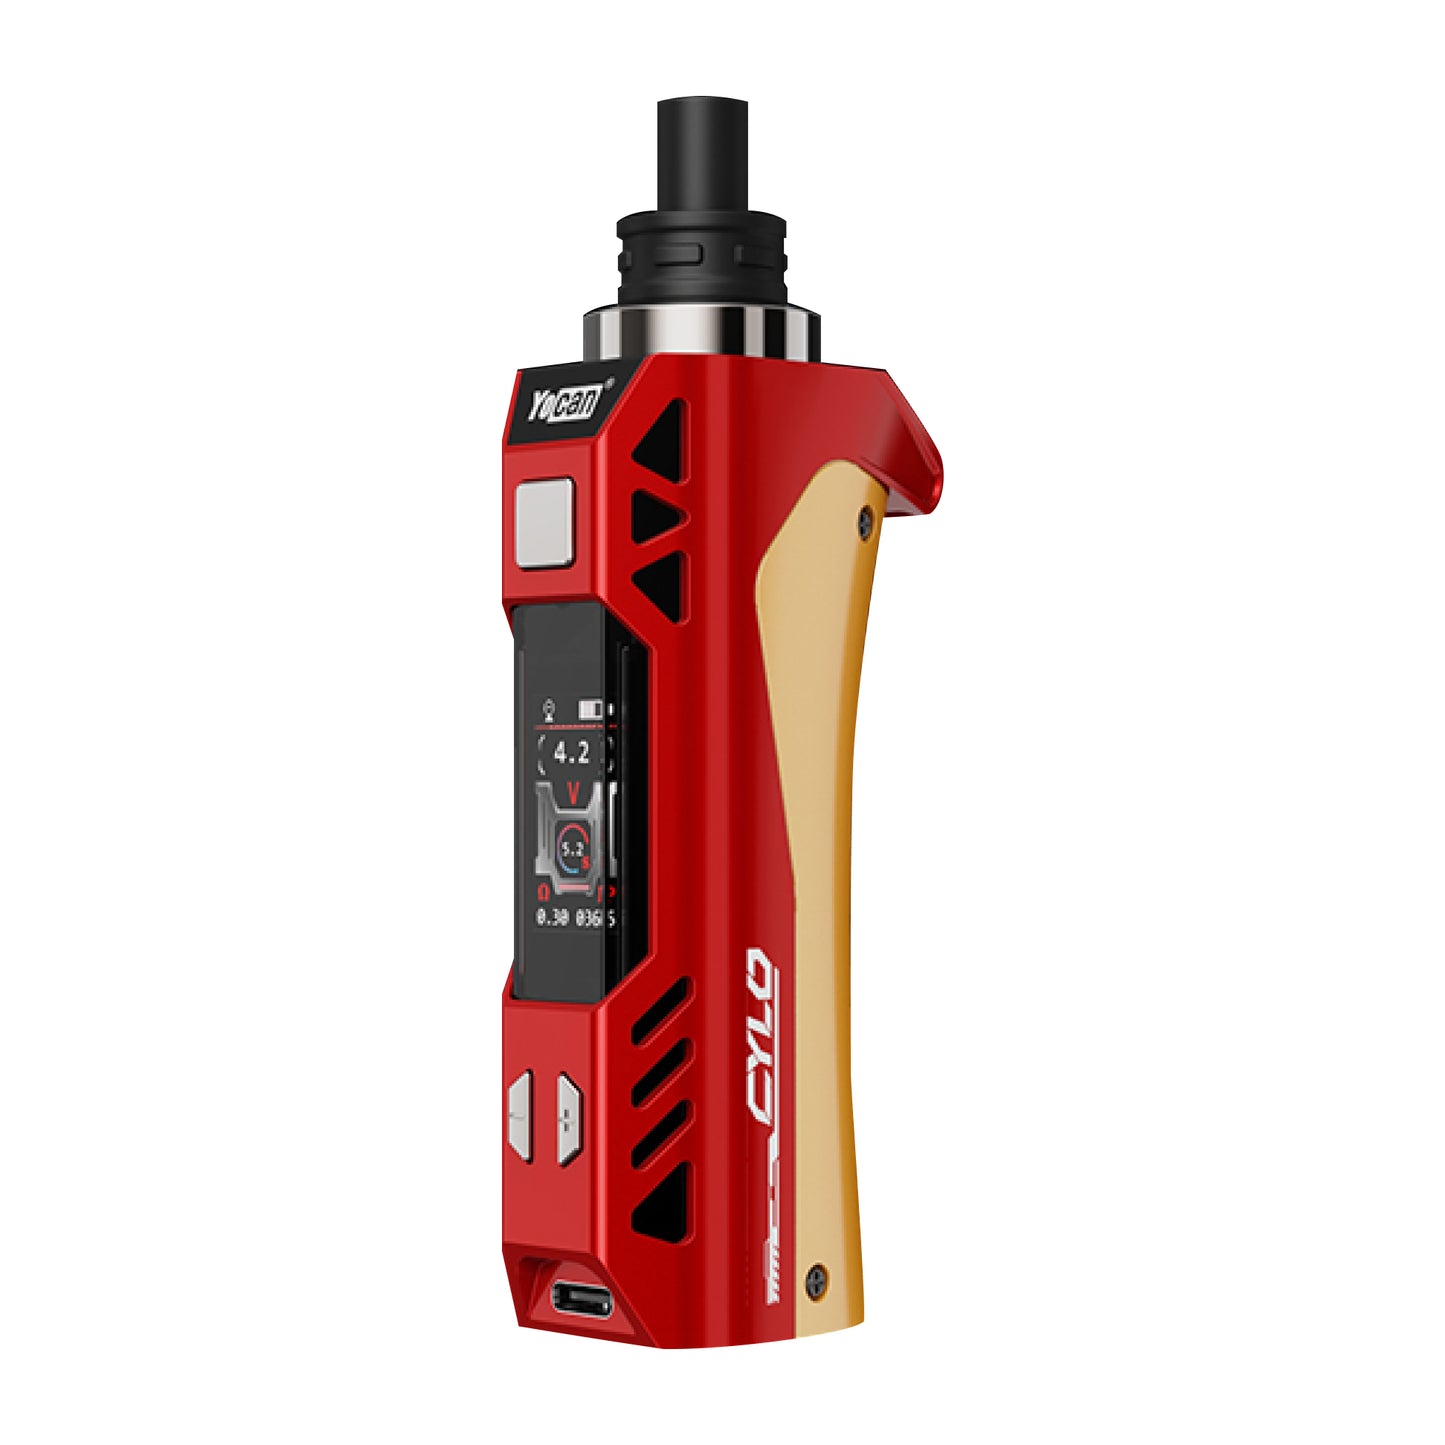 Yocan Cylo Vaporizer - Red-Gold